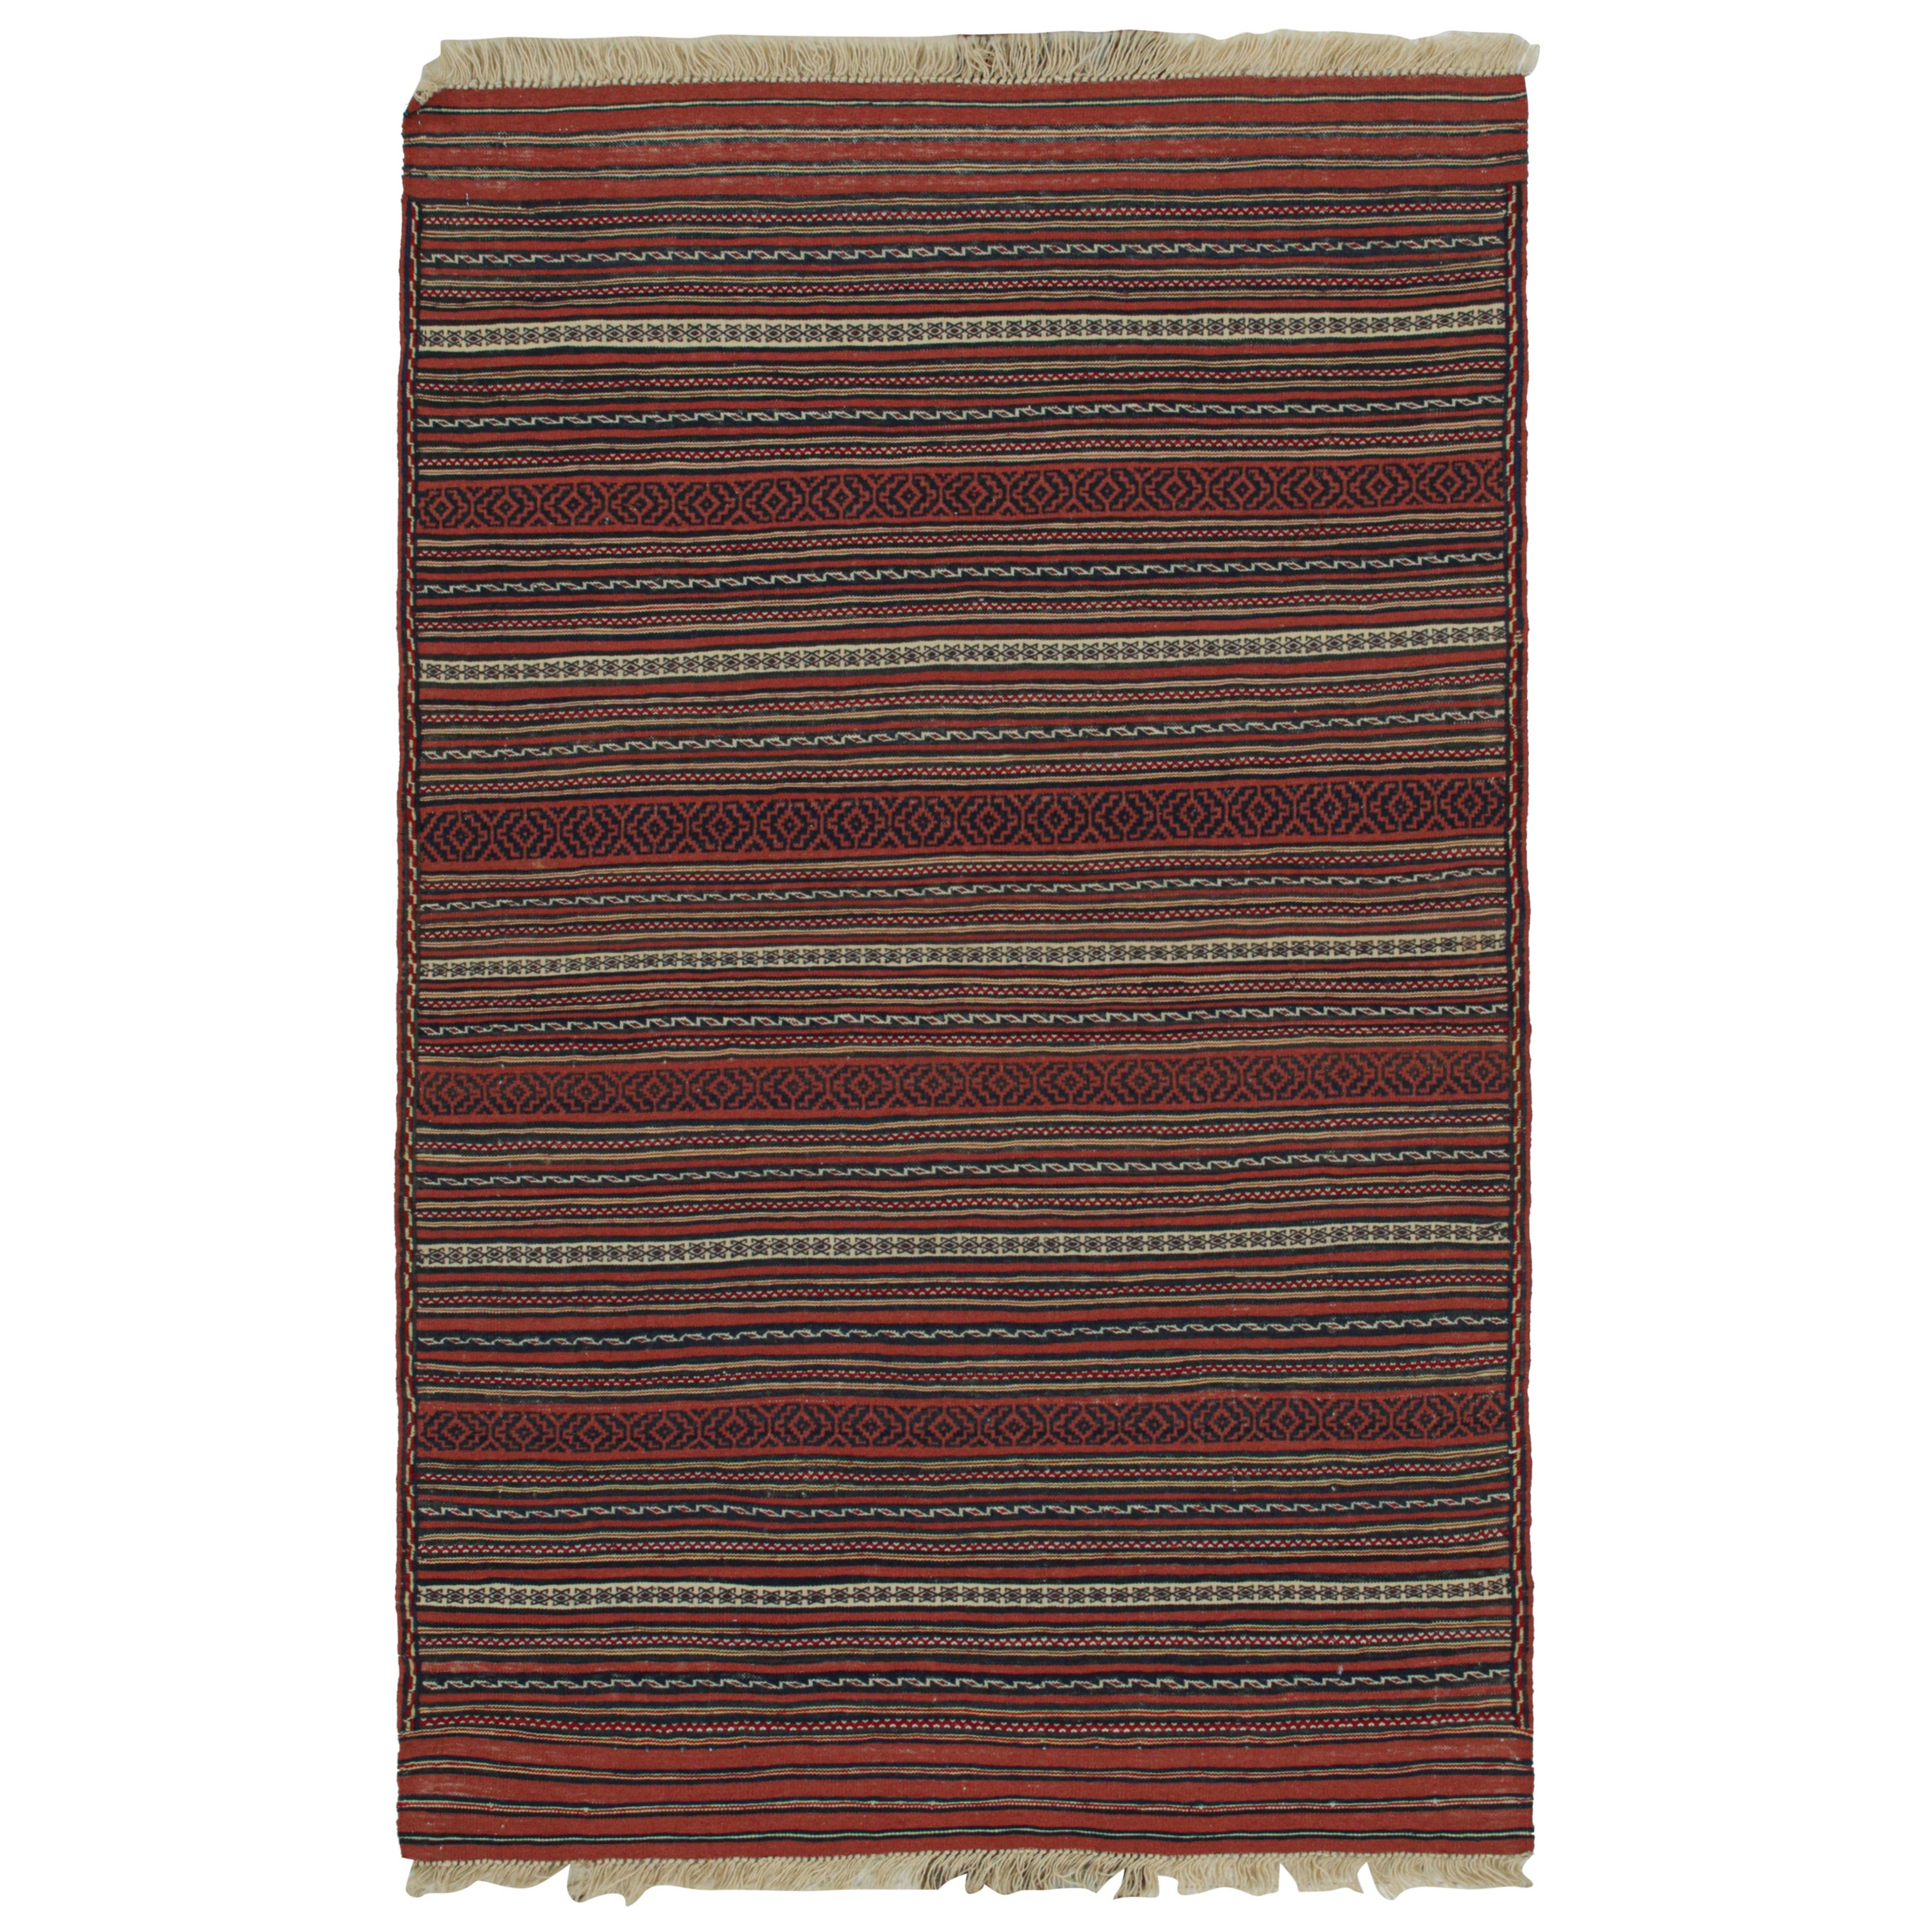 Vintage Baluch Tribal Kilim with Red, Blue and Beige Stripes, from Rug & Kilim